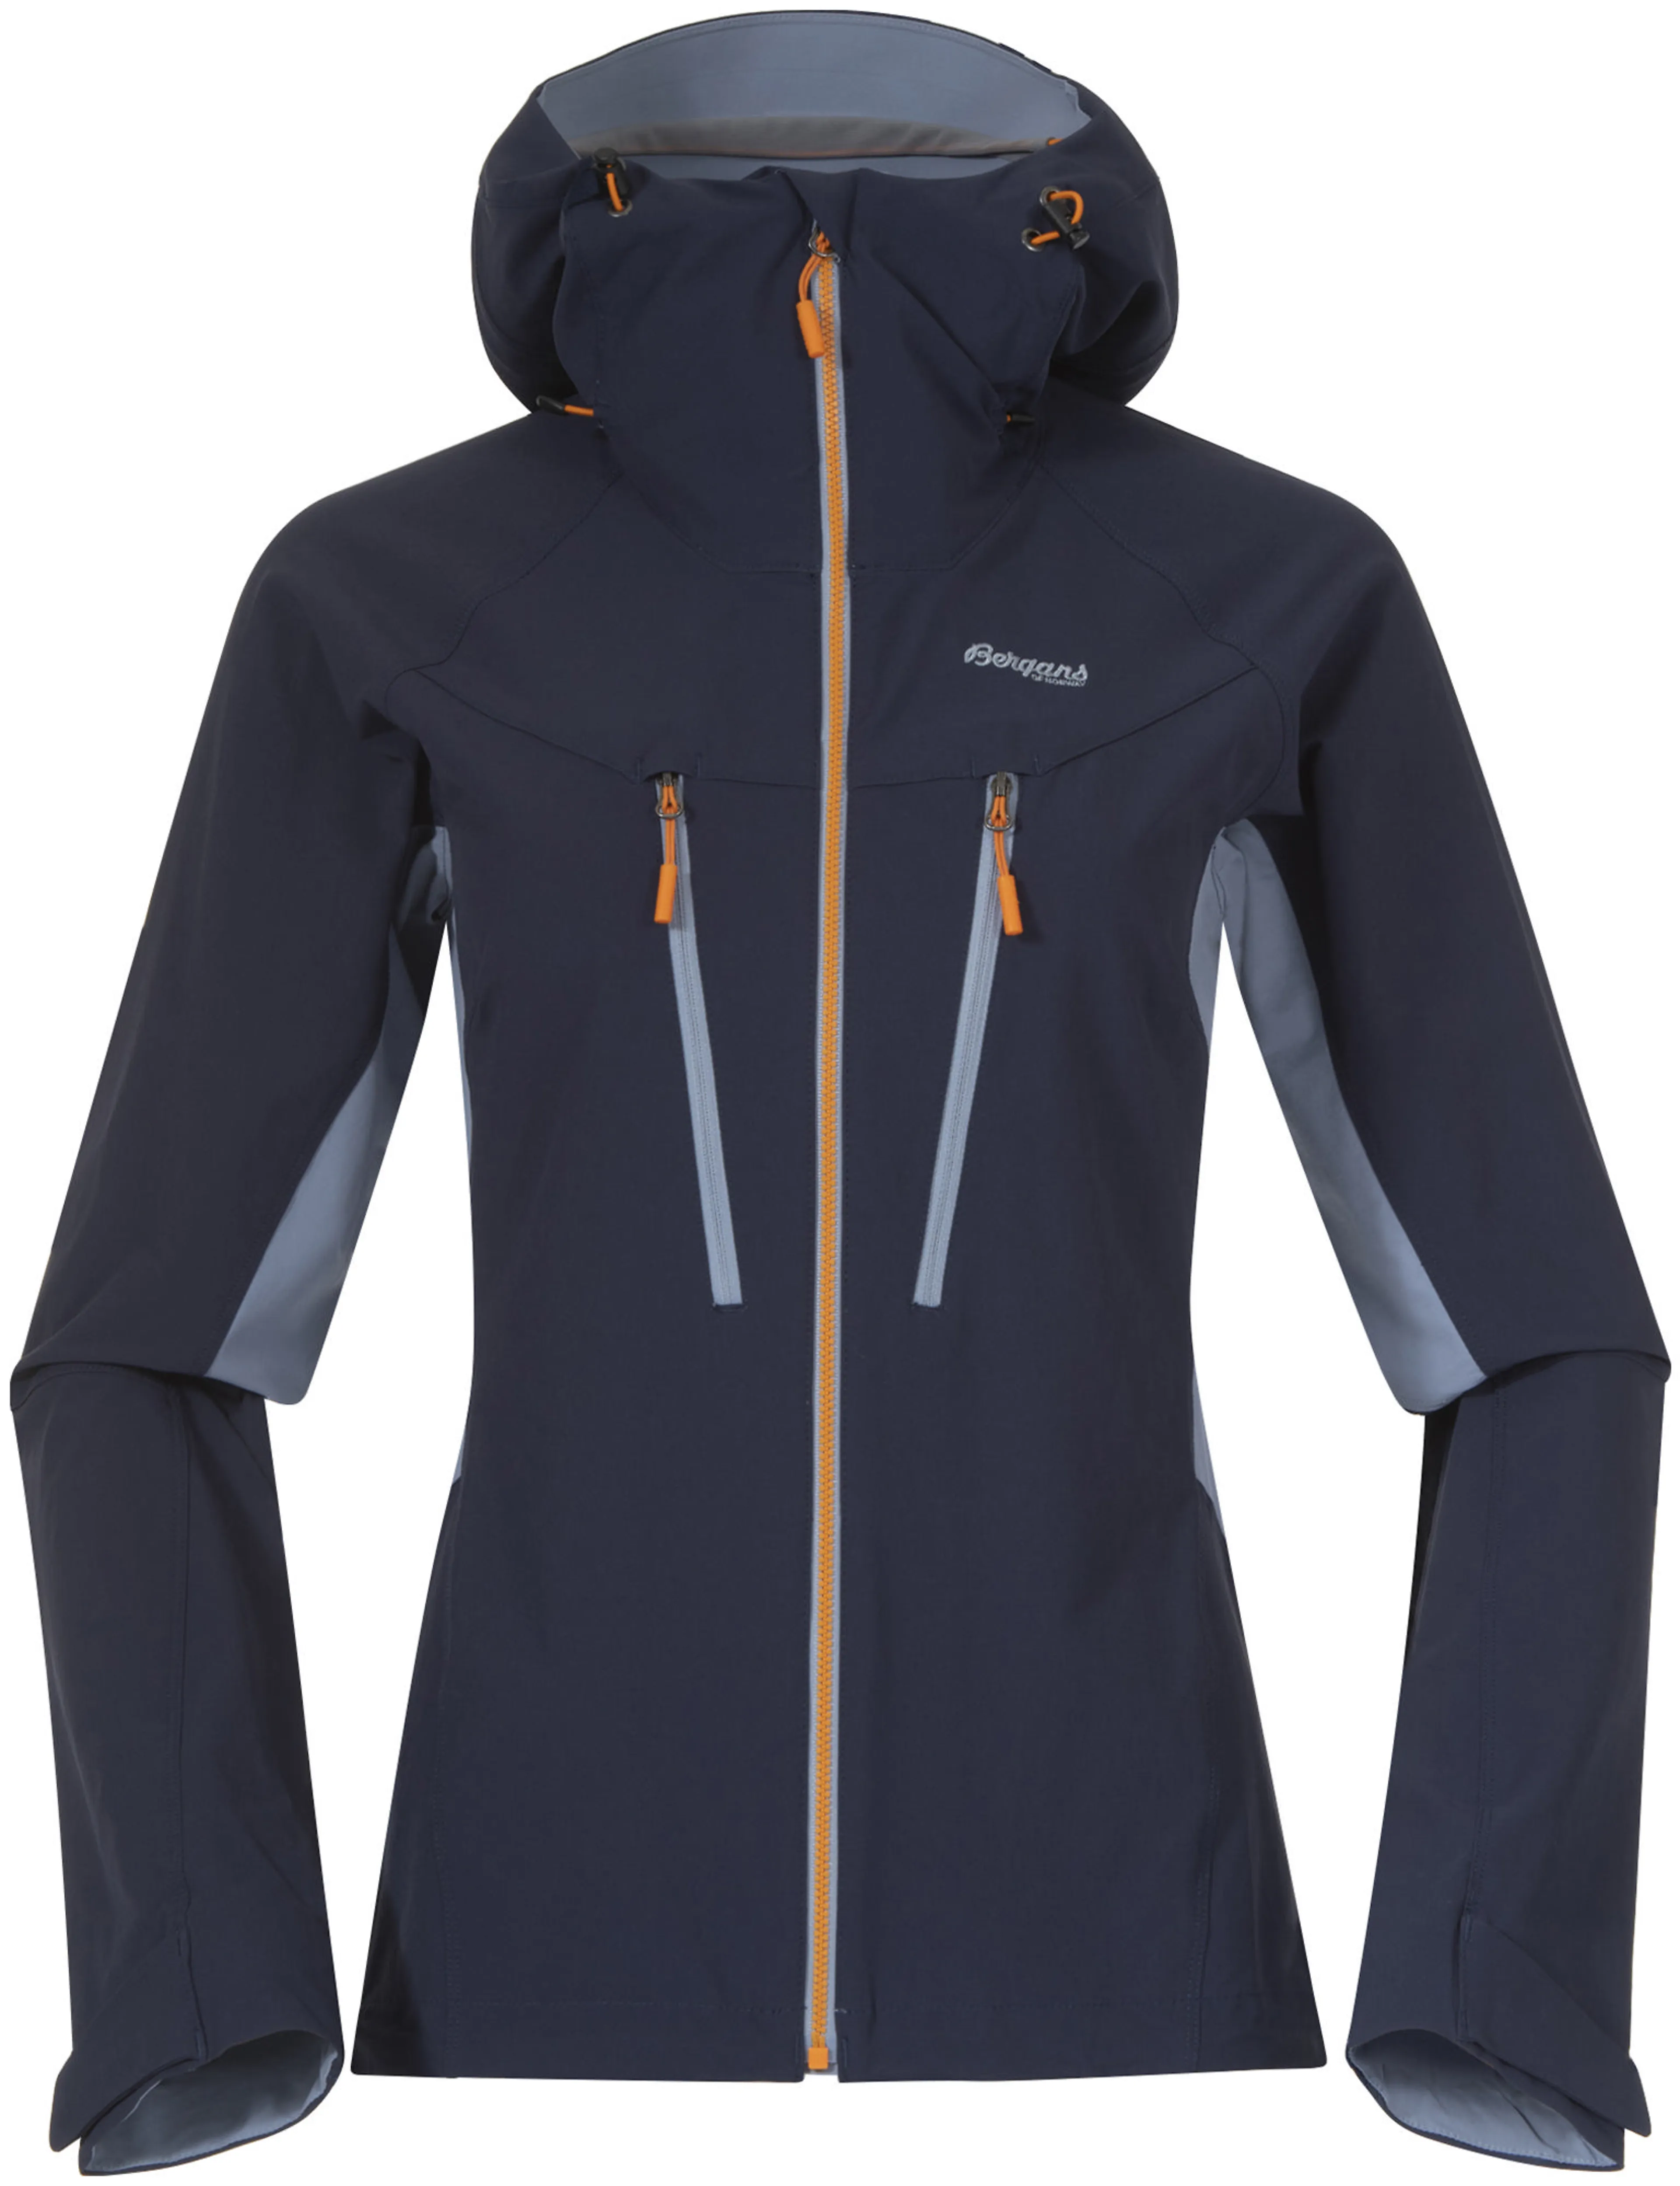 Cecilie Mtn Softshell Jacket